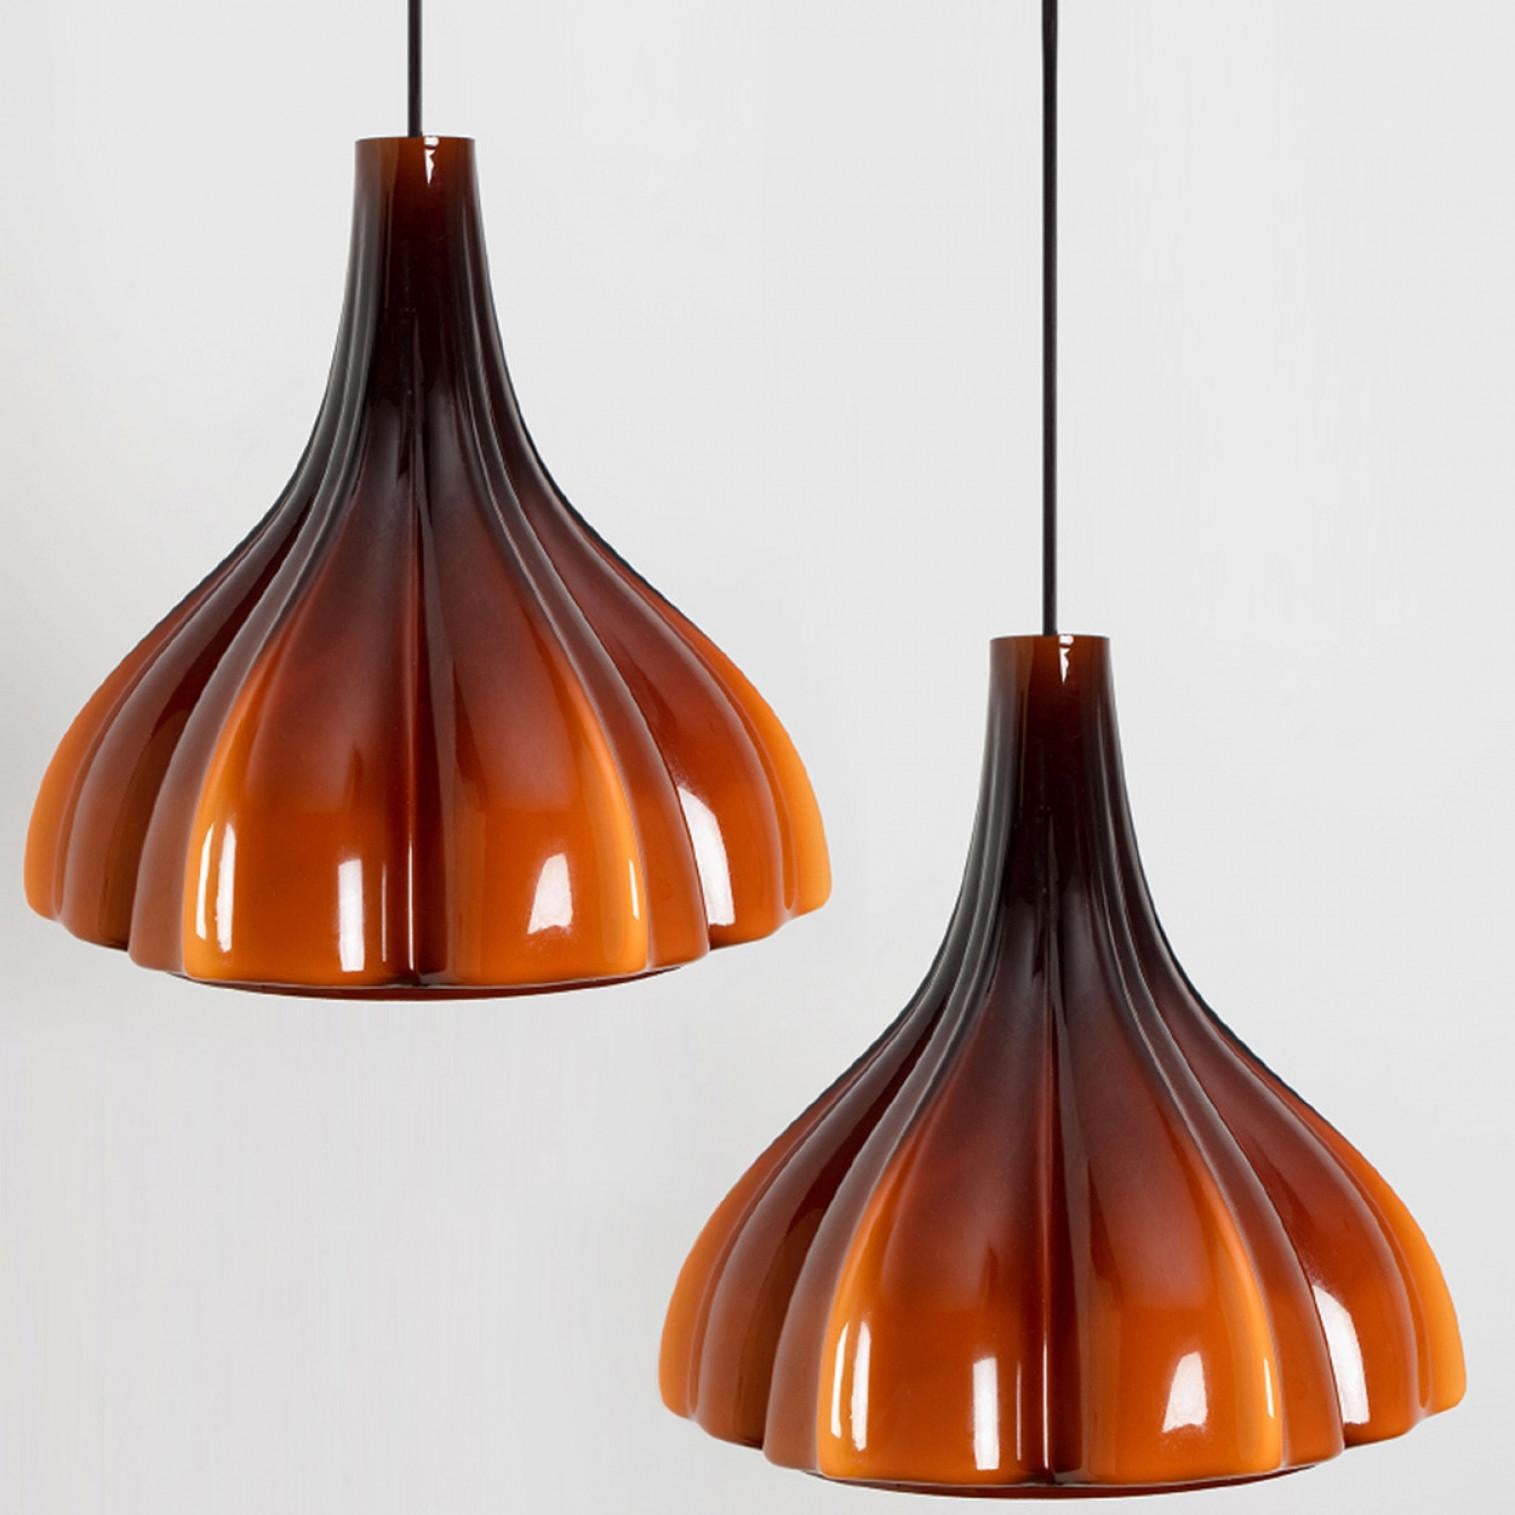 A beautiful and unique brown flower glass pendant, made in the 1970s by german designer and company Peill Putzler.
The lampshade is made of a ‘cast opaque brown glass’ with an inner white glaze, in the shape of a flower.

We have several pendants